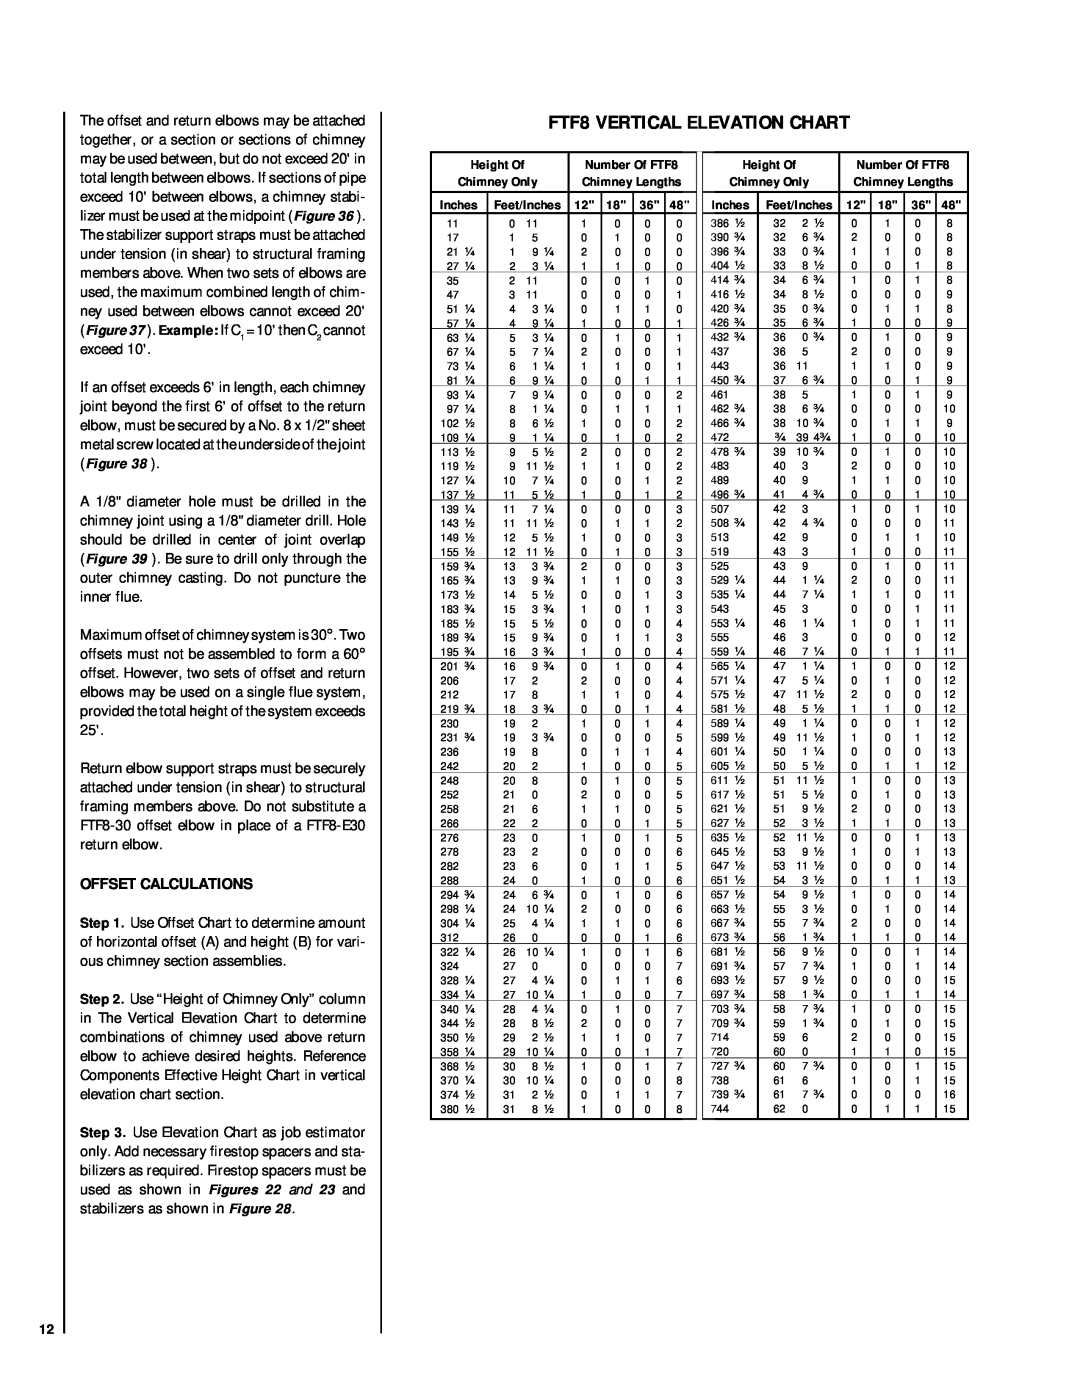 Lennox Hearth RDI-42-H, HCI-42-H installation instructions FTF8 VERTICAL ELEVATION CHART, Offset Calculations 